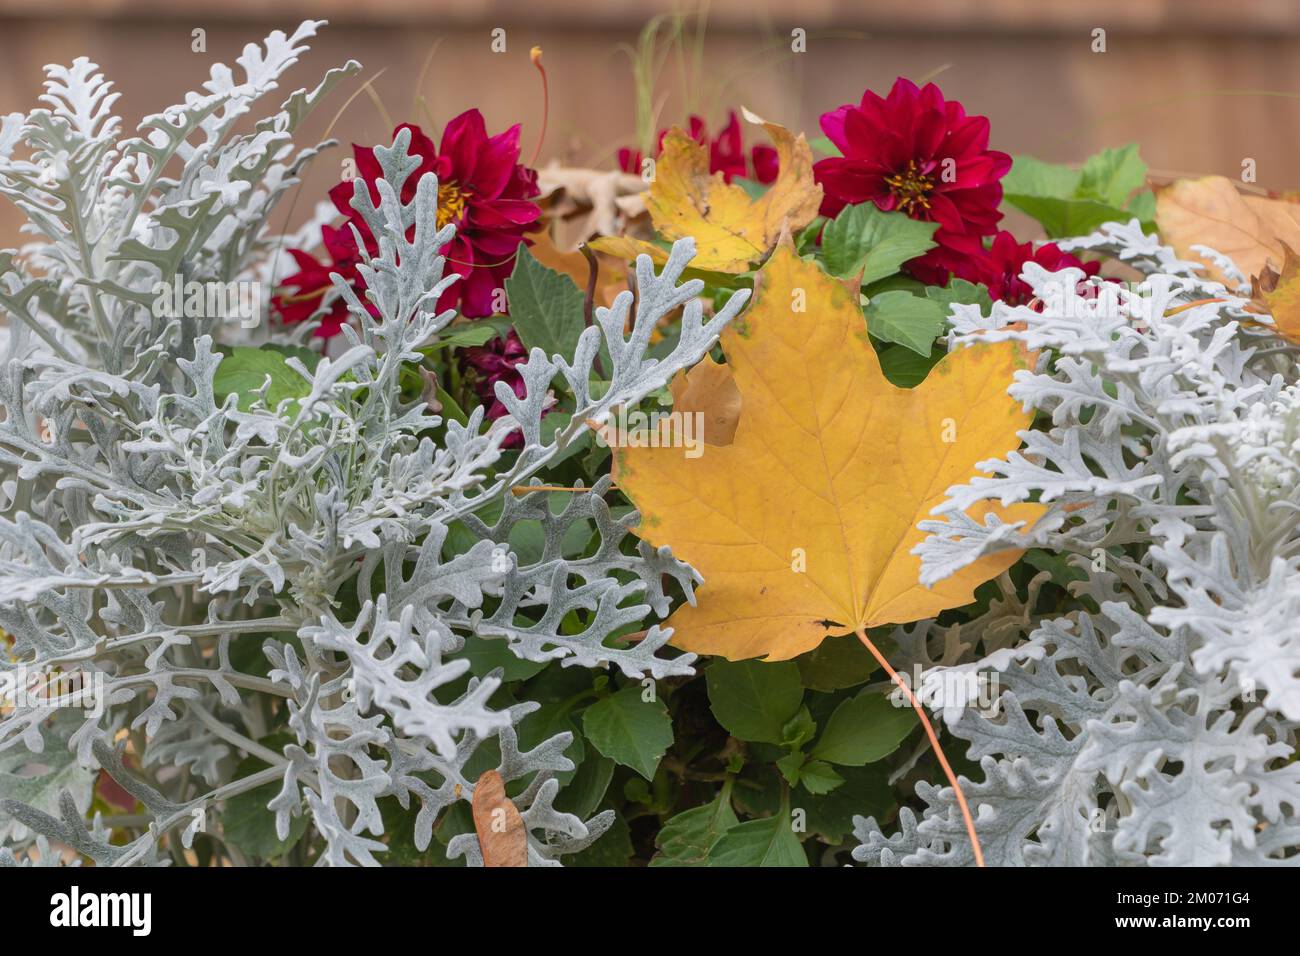 A yellow maple leaf fallen between Jacobaea maritima plant and a red flower in autumn Stock Photo